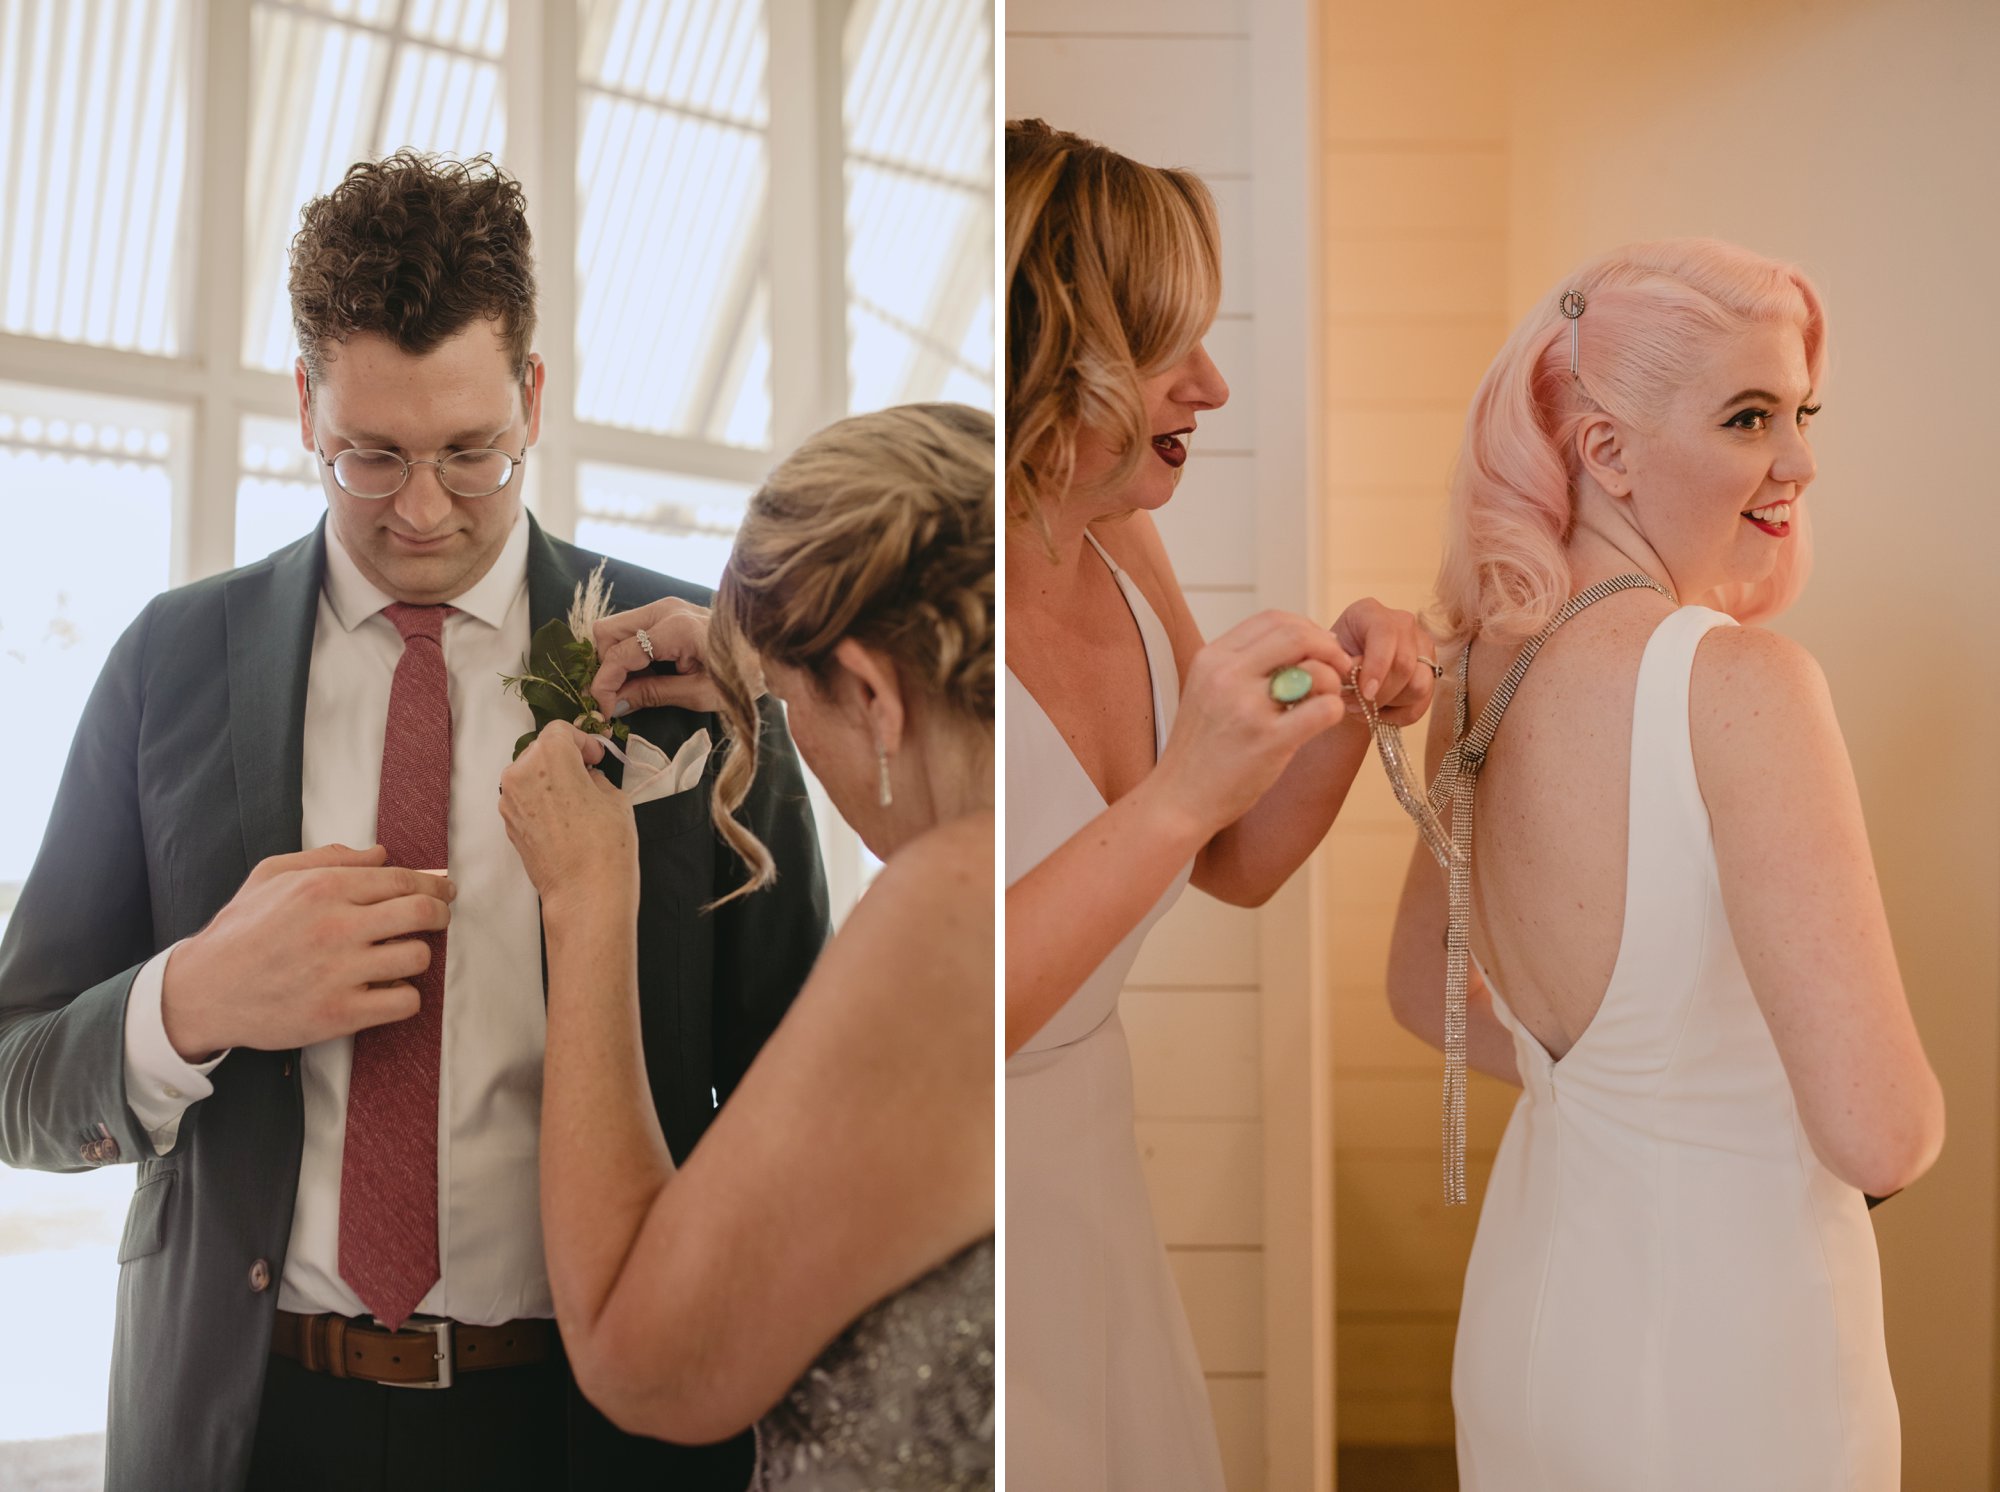 Bride with pink hair and groom in a purple suit prospect house wedding in austin tx with pastel decor and wild florals getting ready